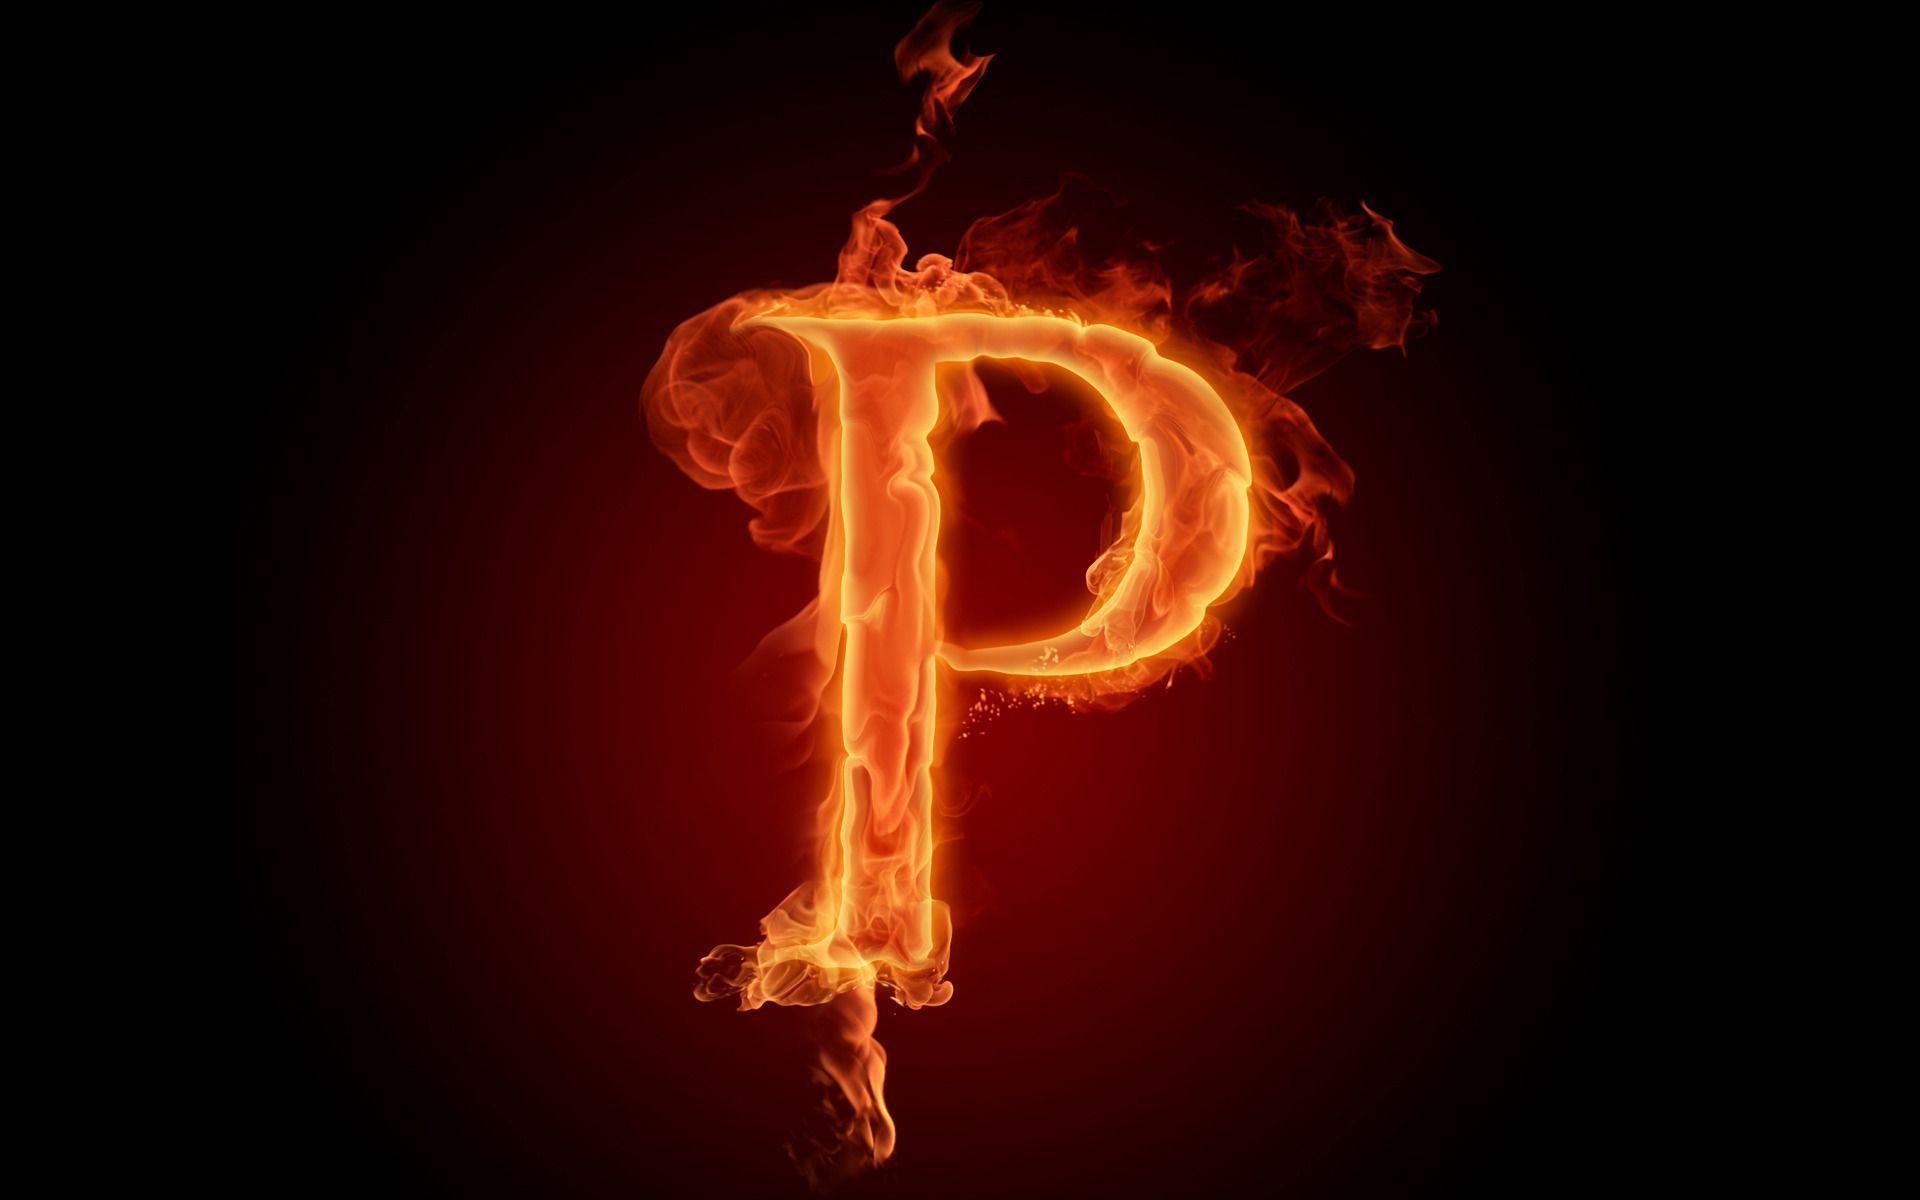 P Letter Wallpapers - Top Free P Letter Backgrounds - WallpaperAccess